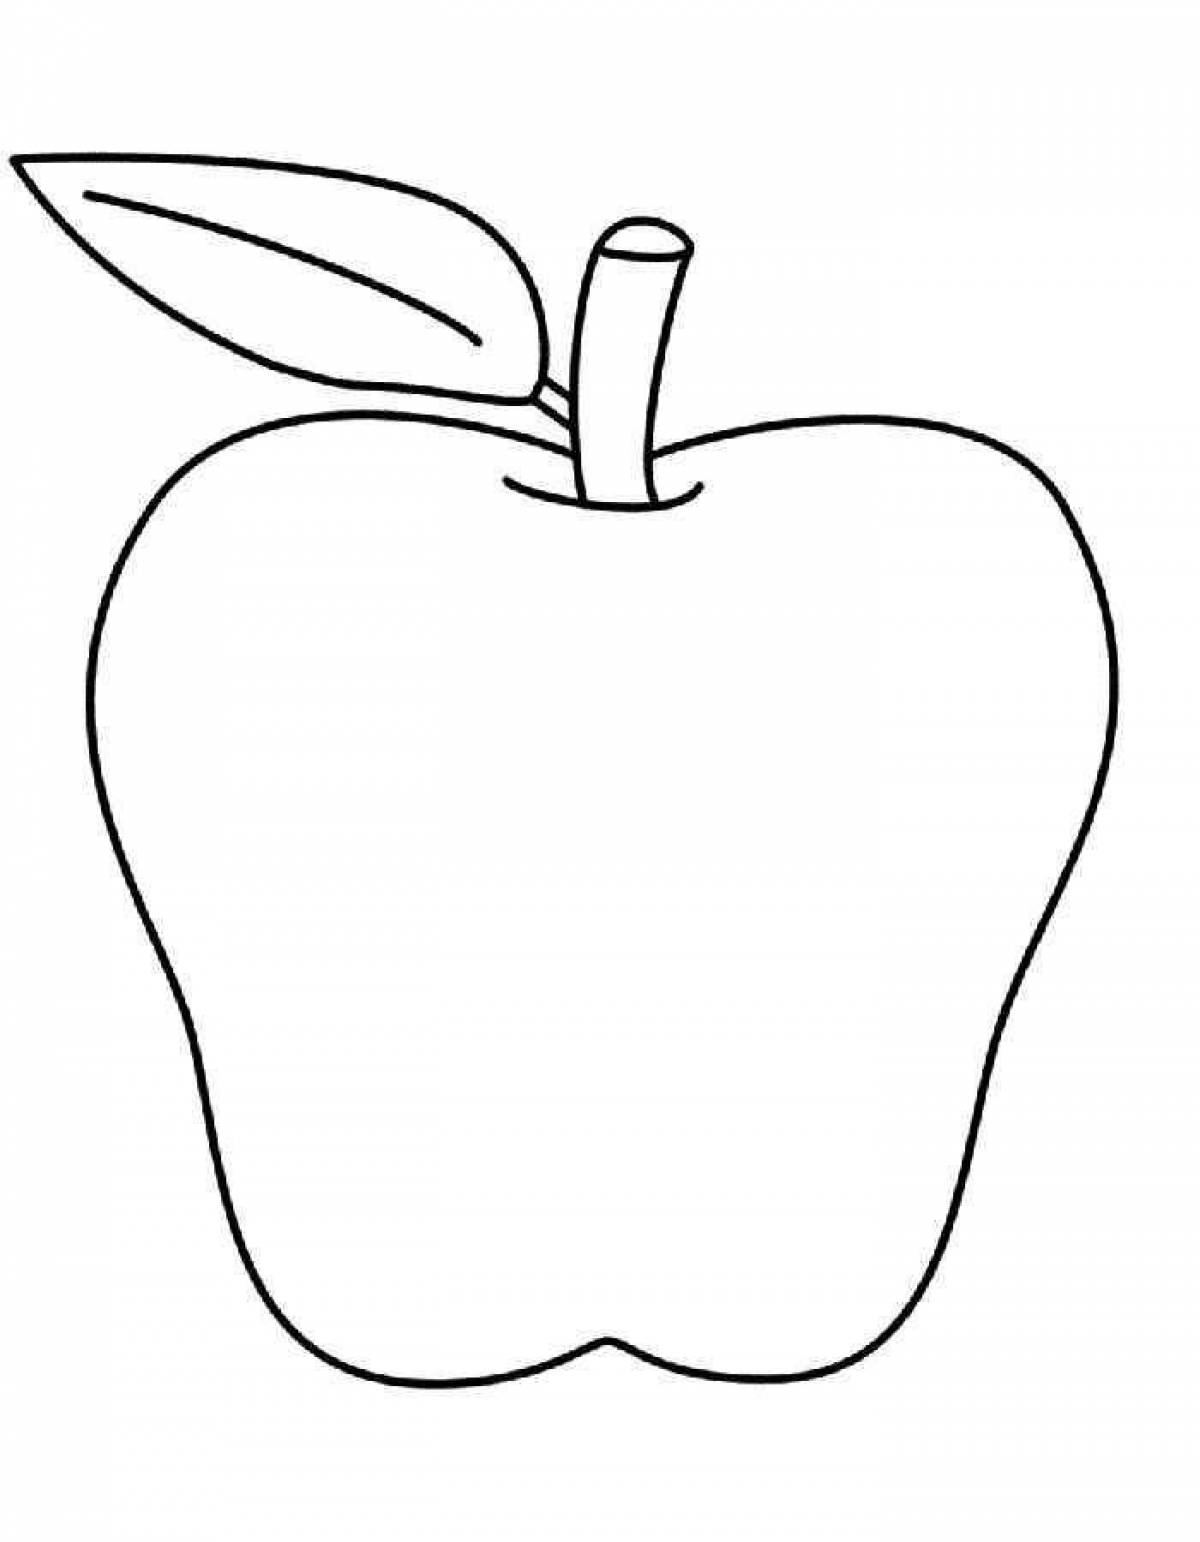 Apple for children 3 4 years old #4